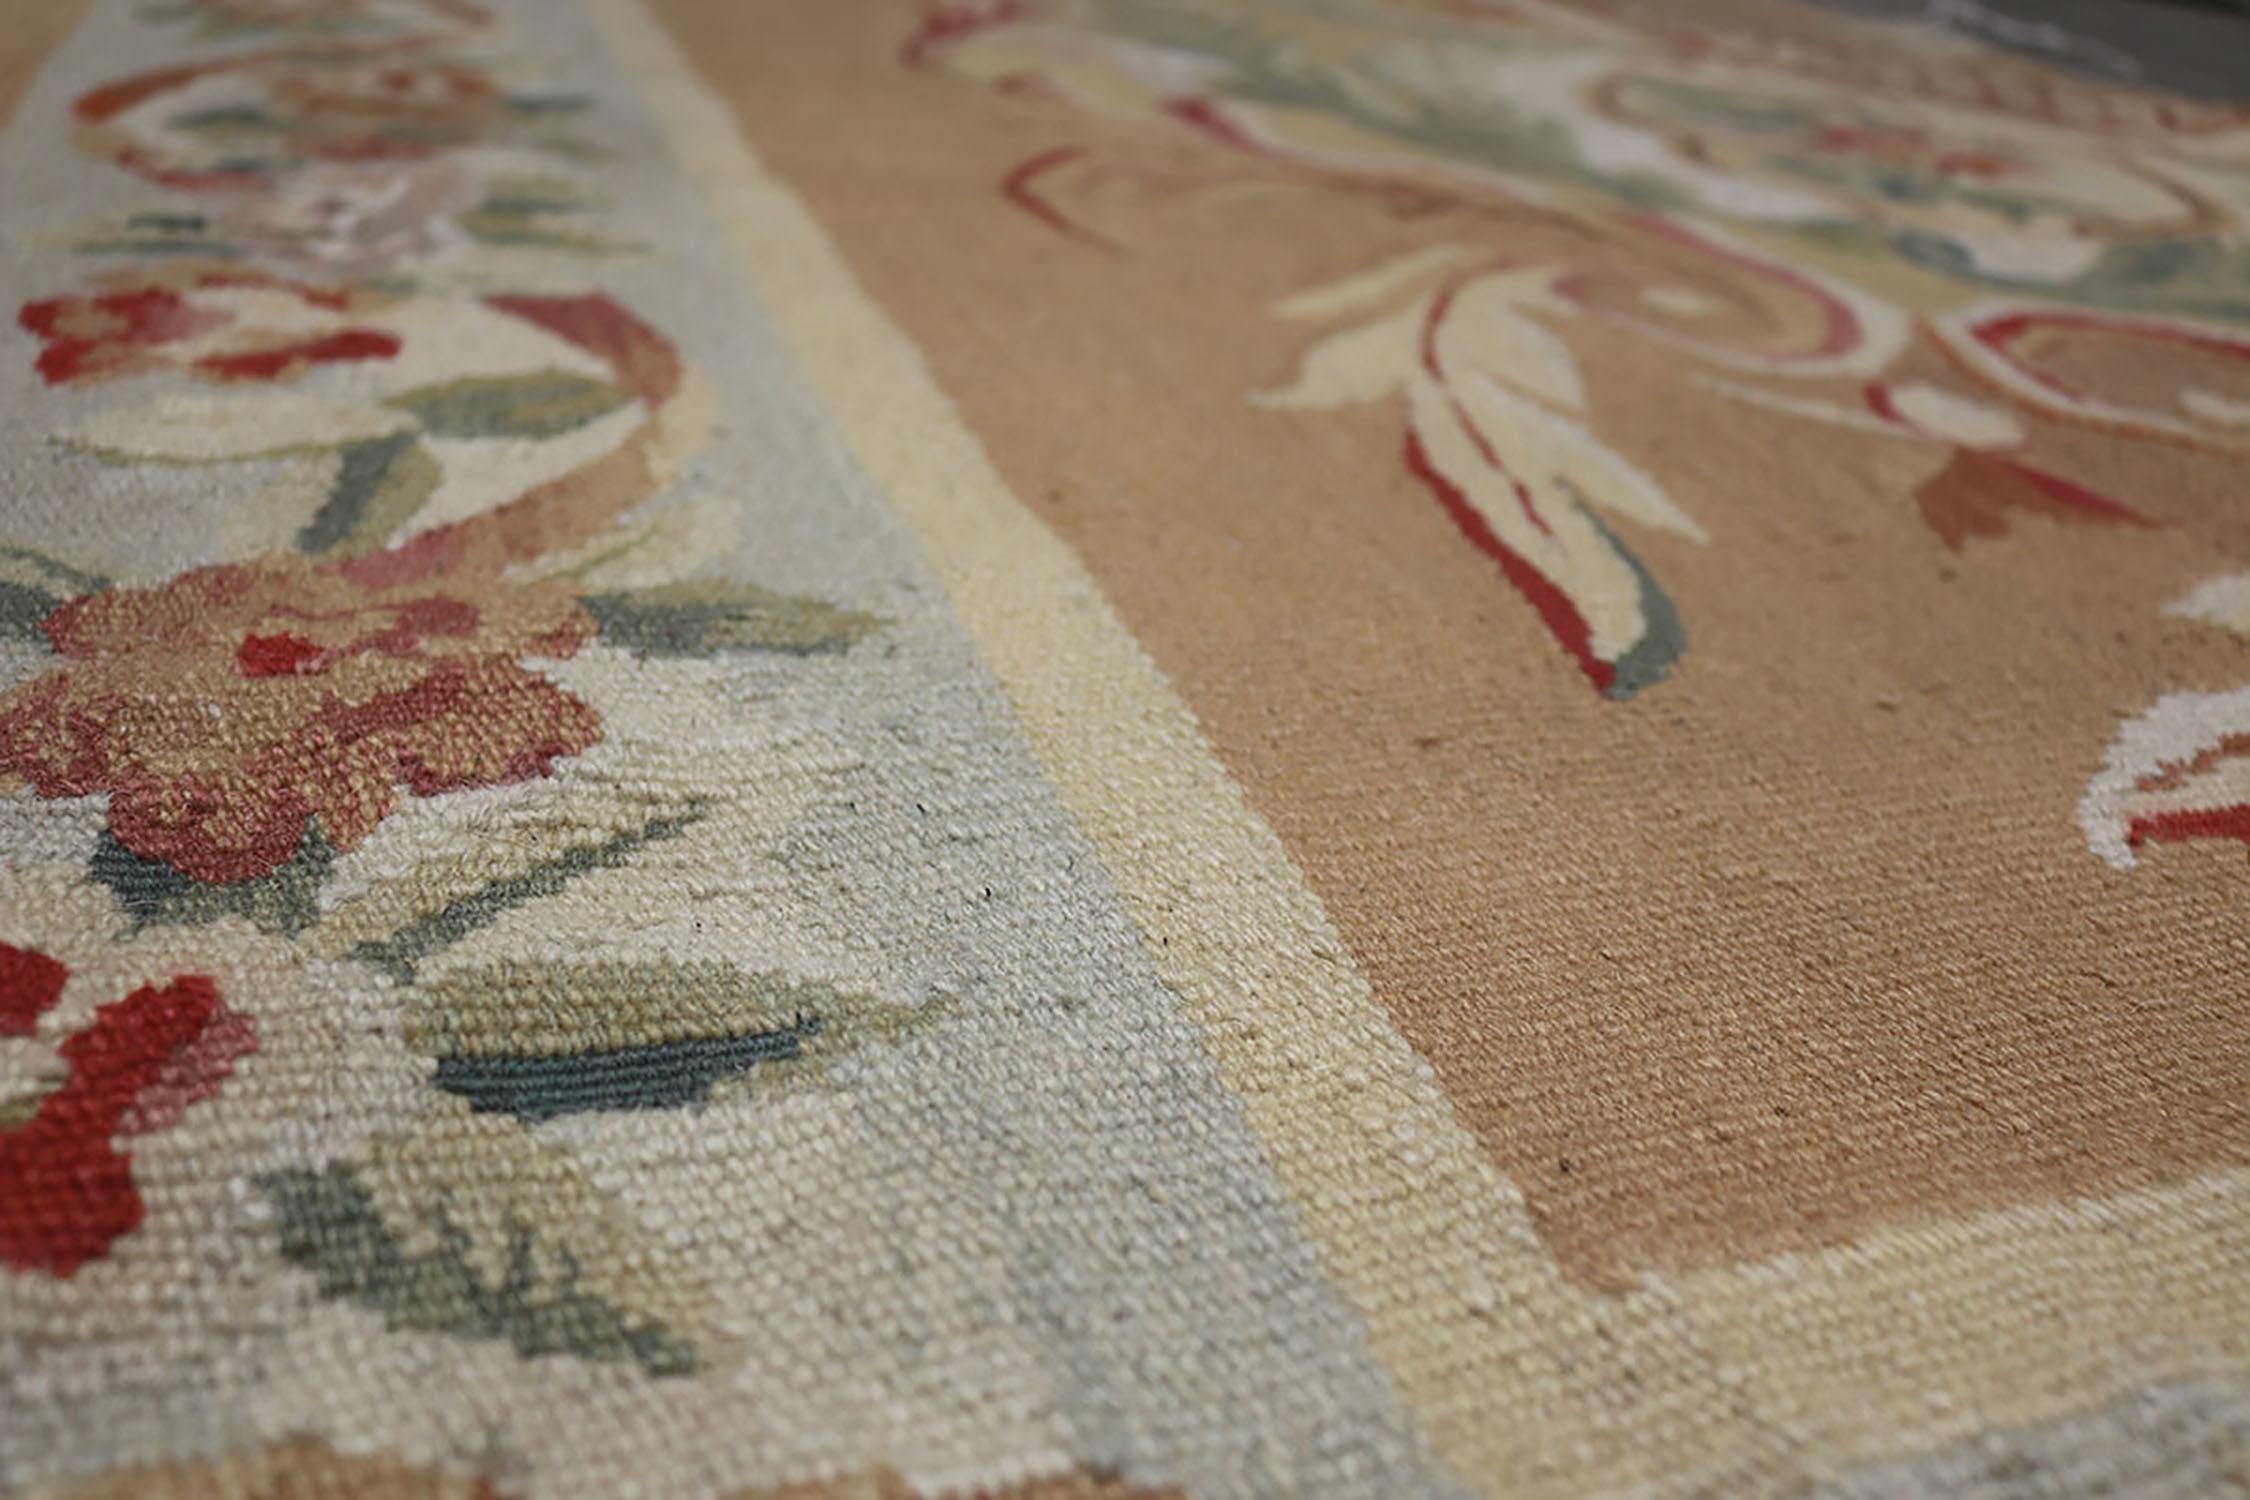 Hand-knotted in wool, this 12x15 transitional rug is an addition to the European rug collection by Rug & Kilim, affectionately named for the inspiration hailing from time-honored Aubusson rug patterns in hues of brown and green.